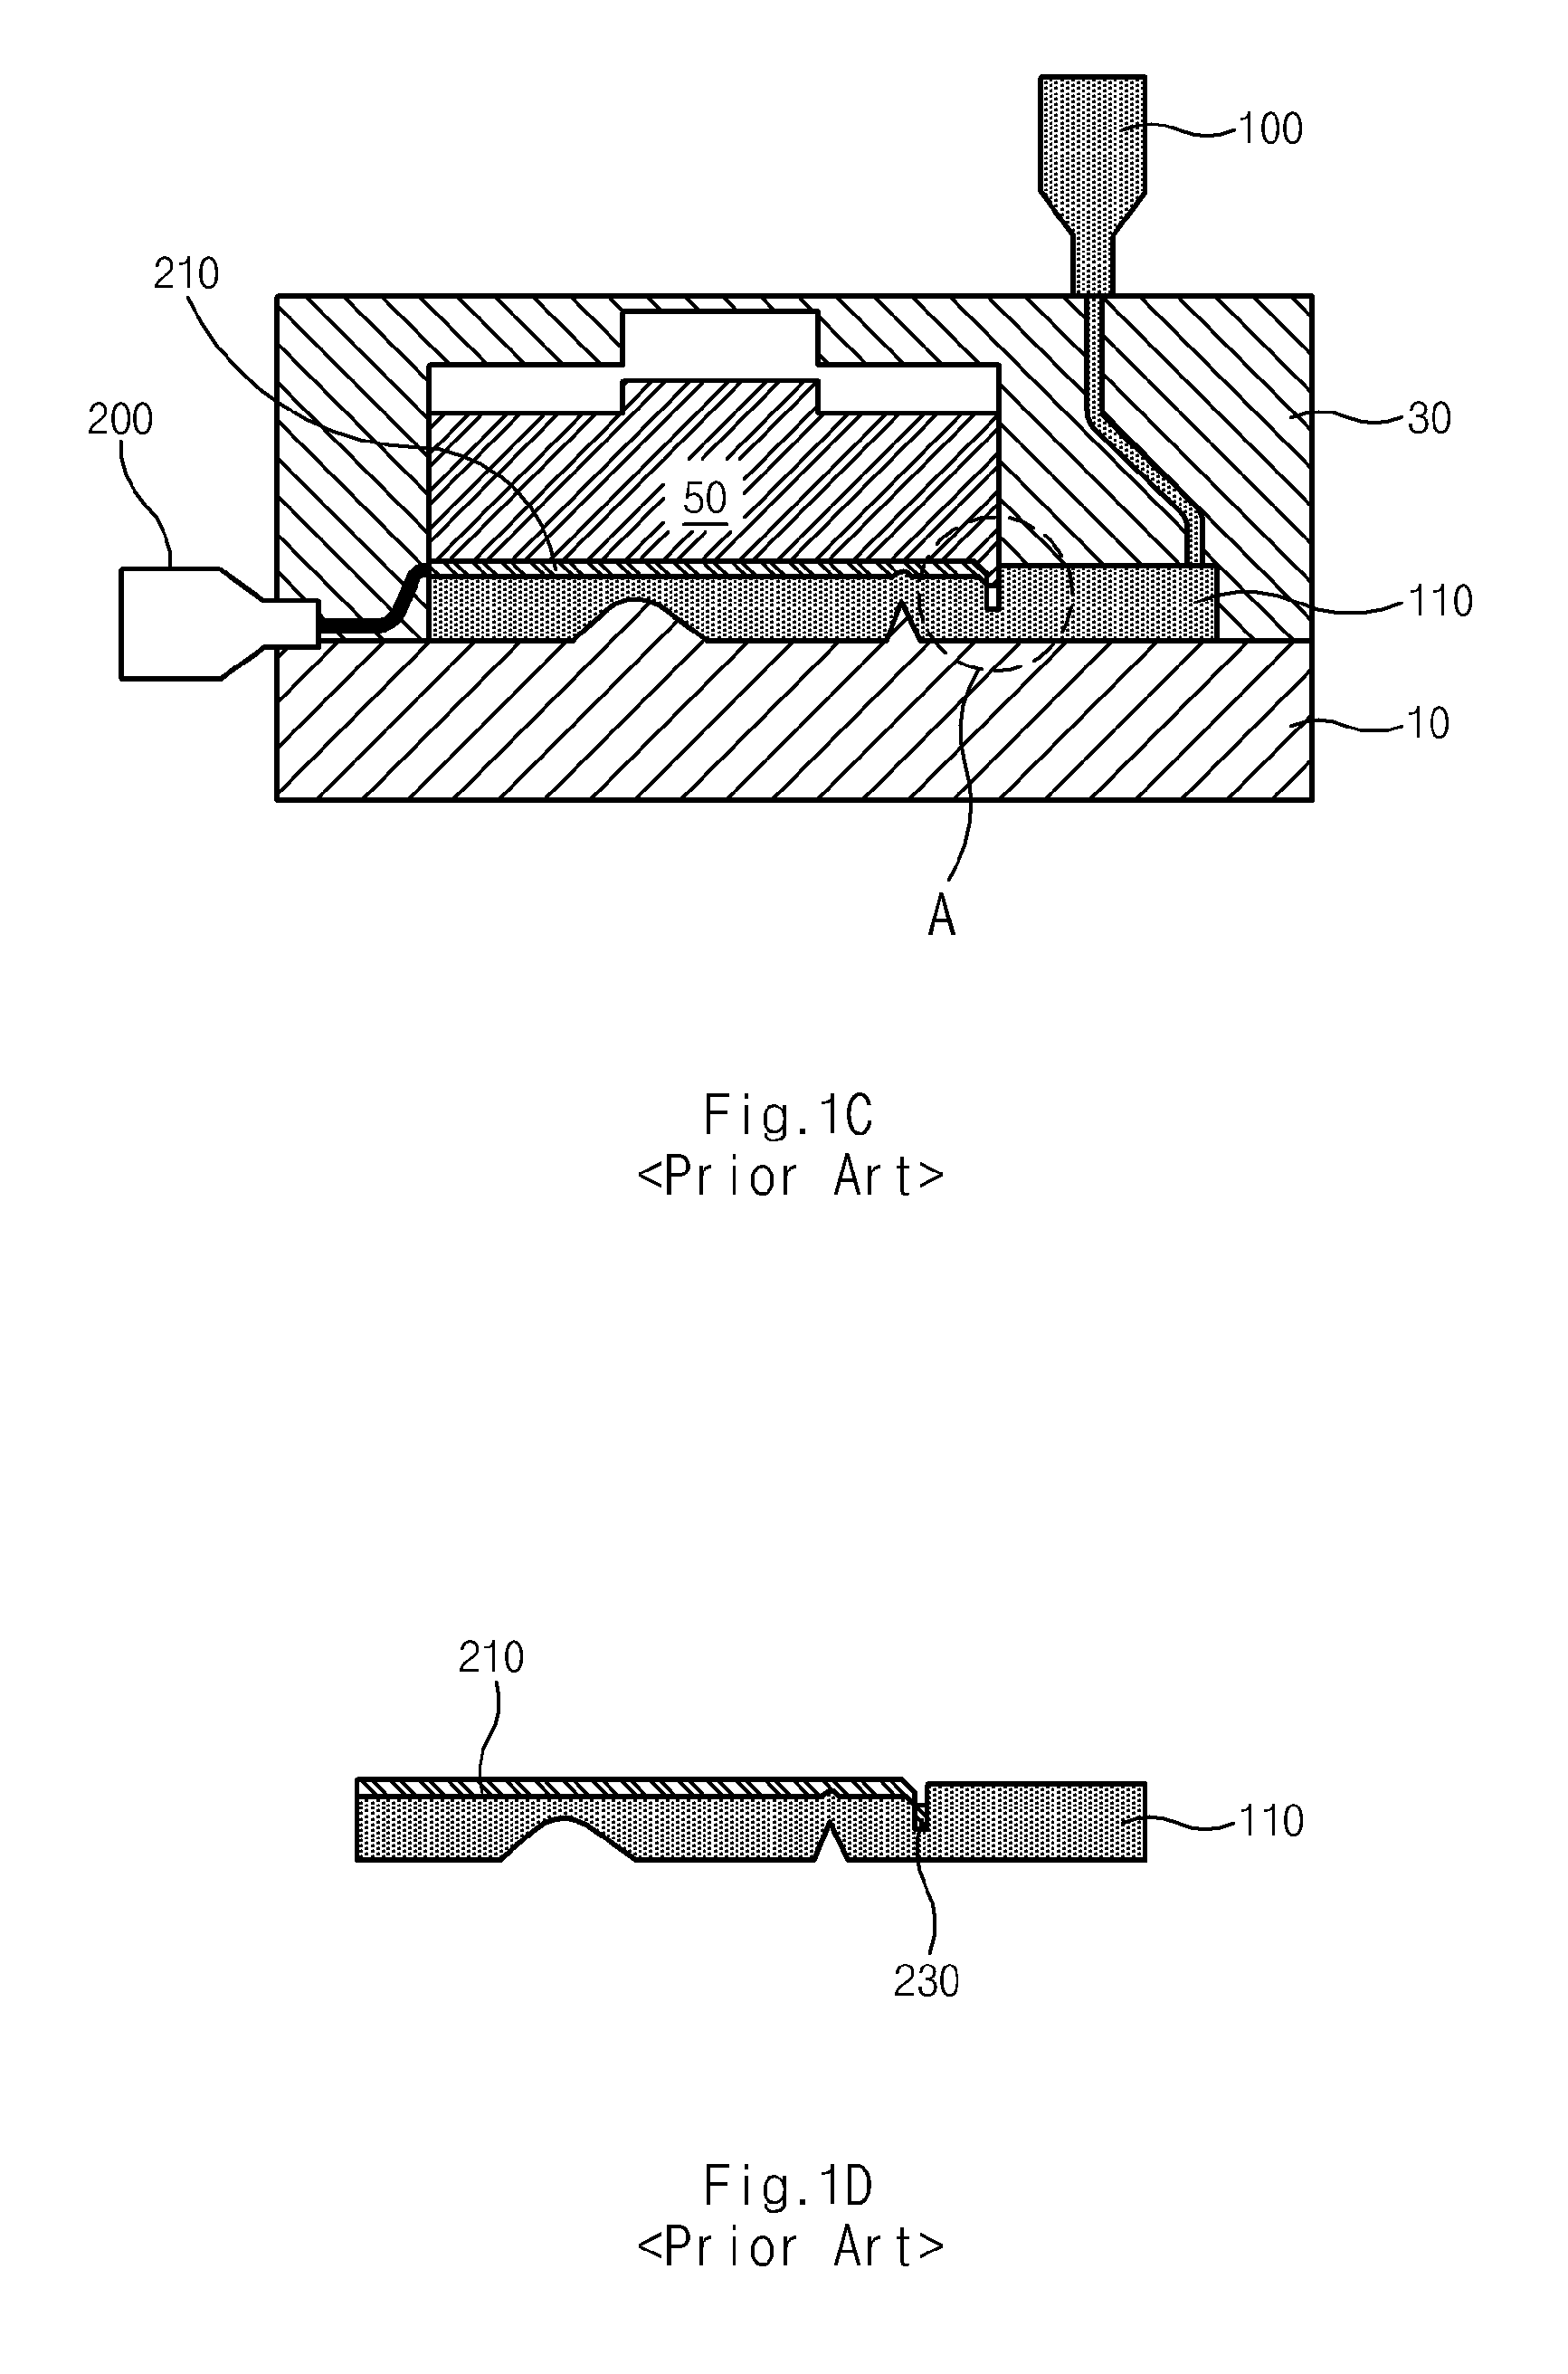 Localized over-molding die structure